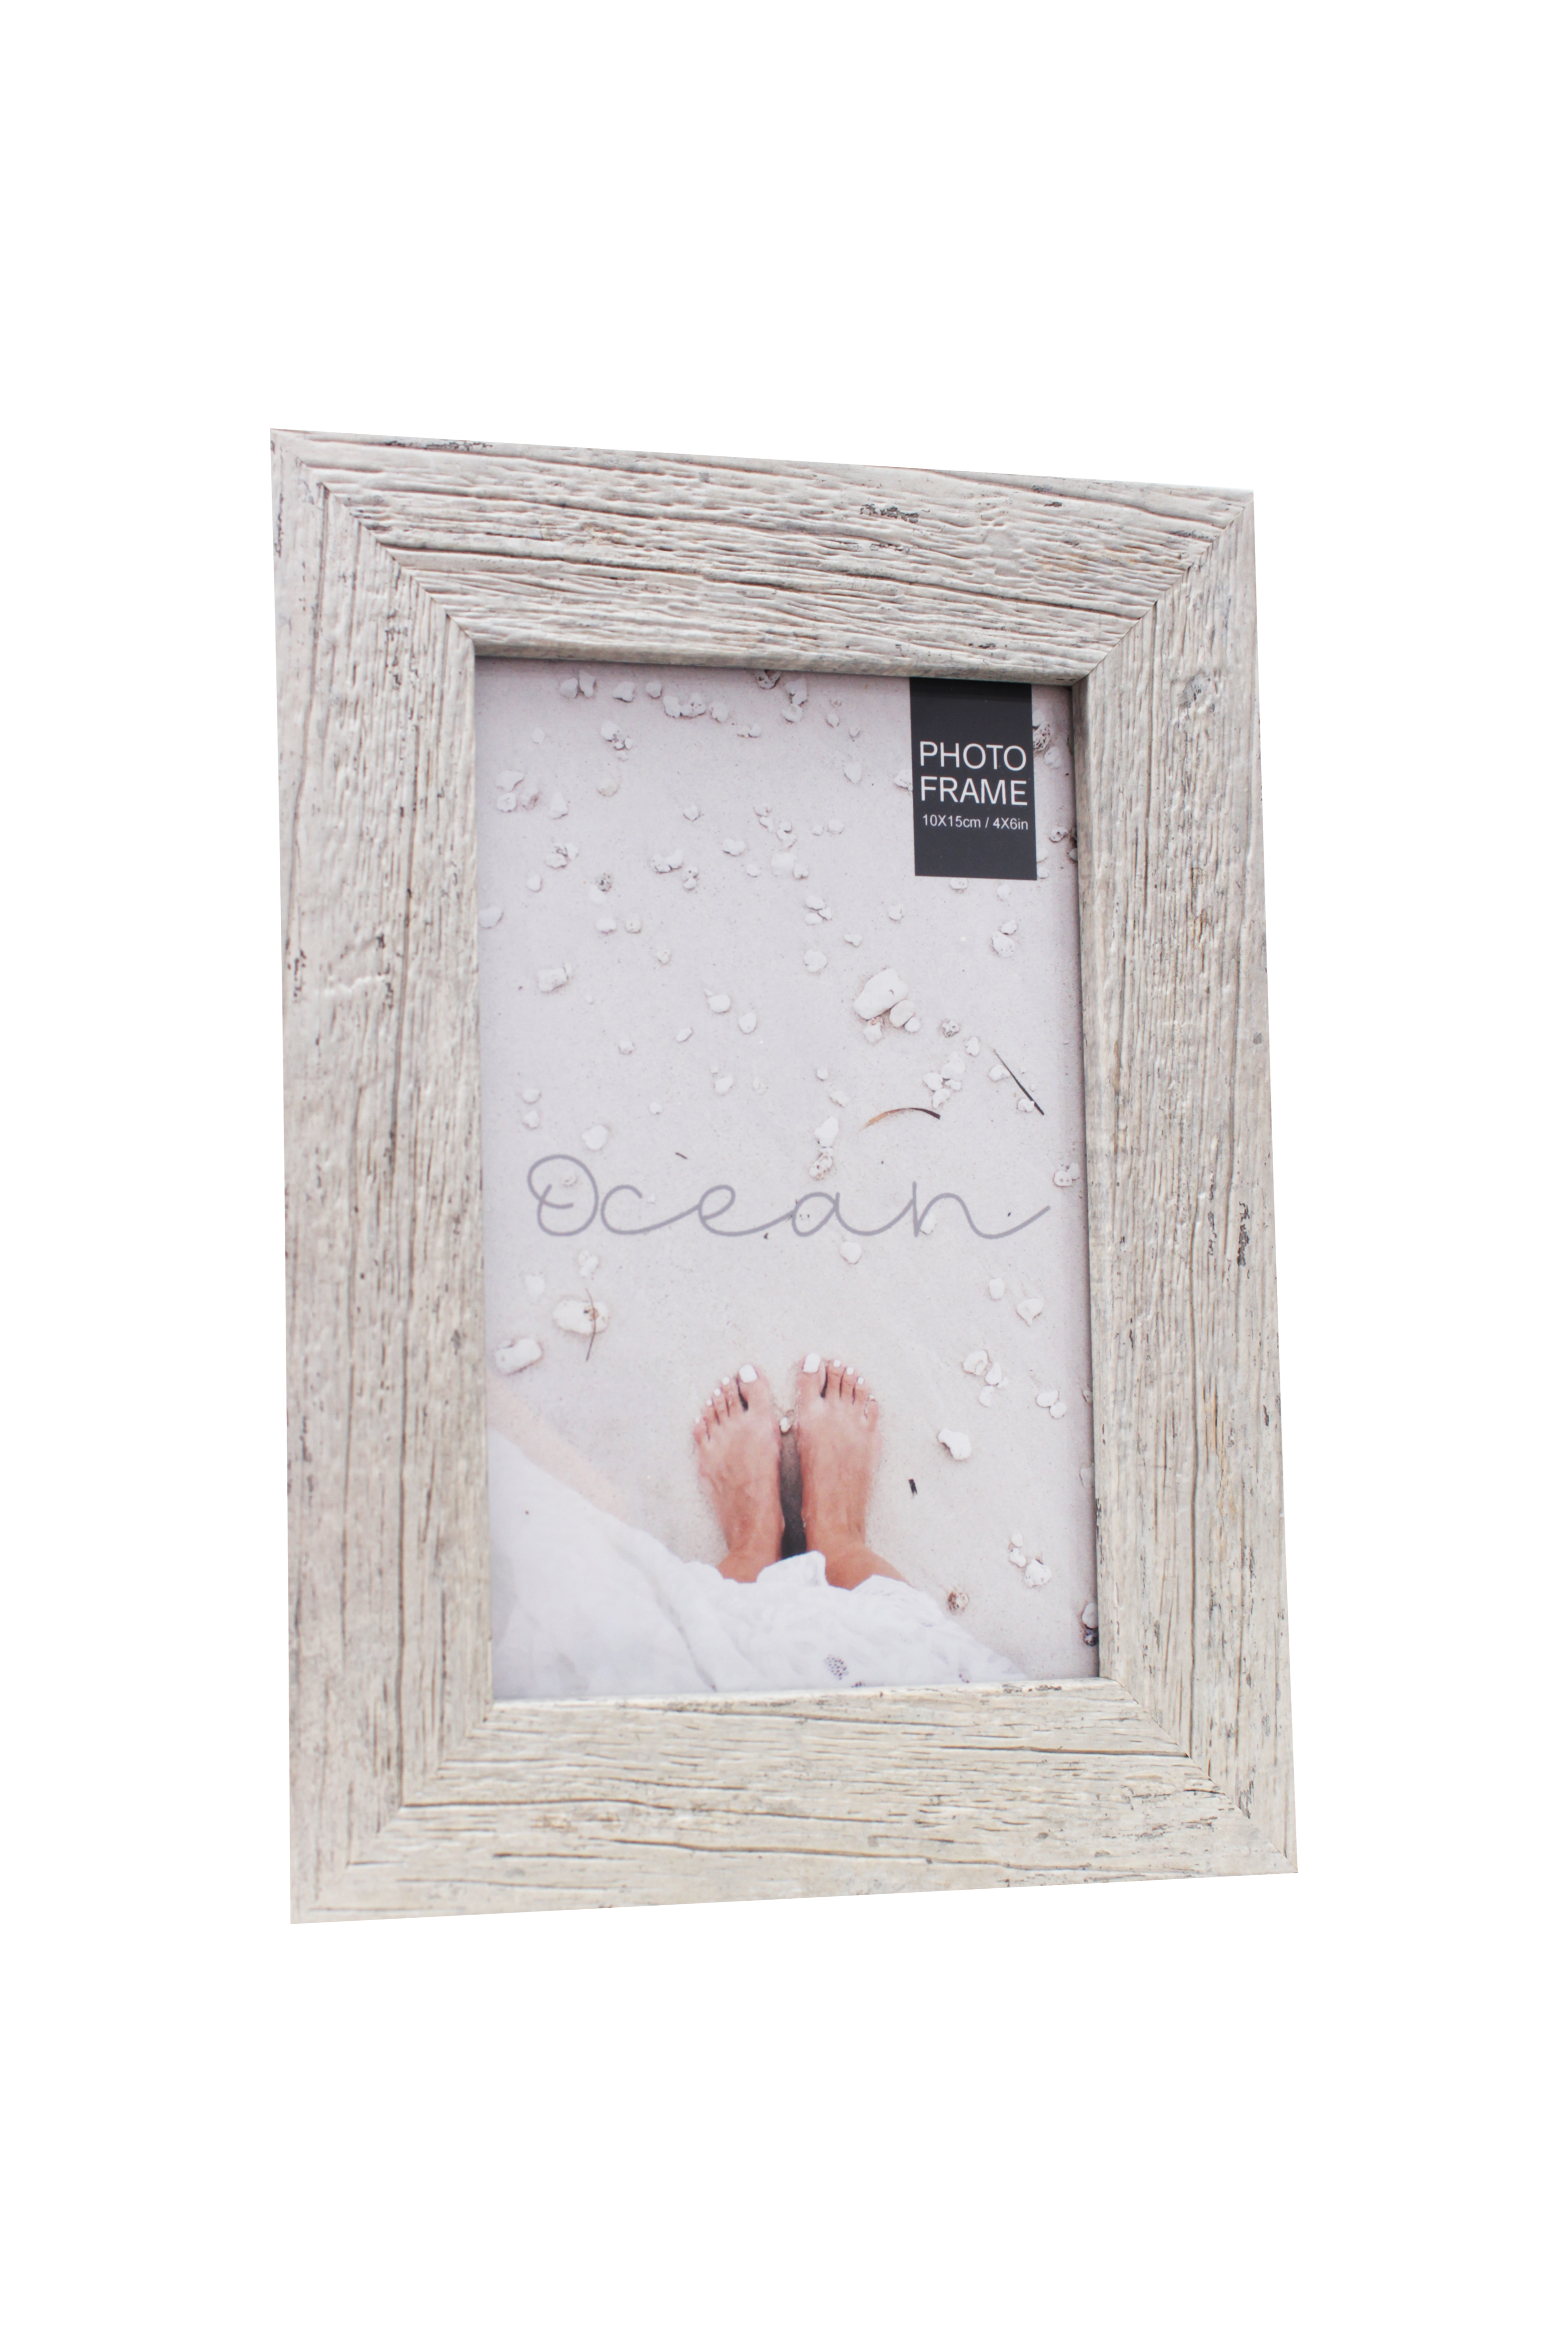 PHOTO FRAME 10 X 15CM ASSORTED COLORS